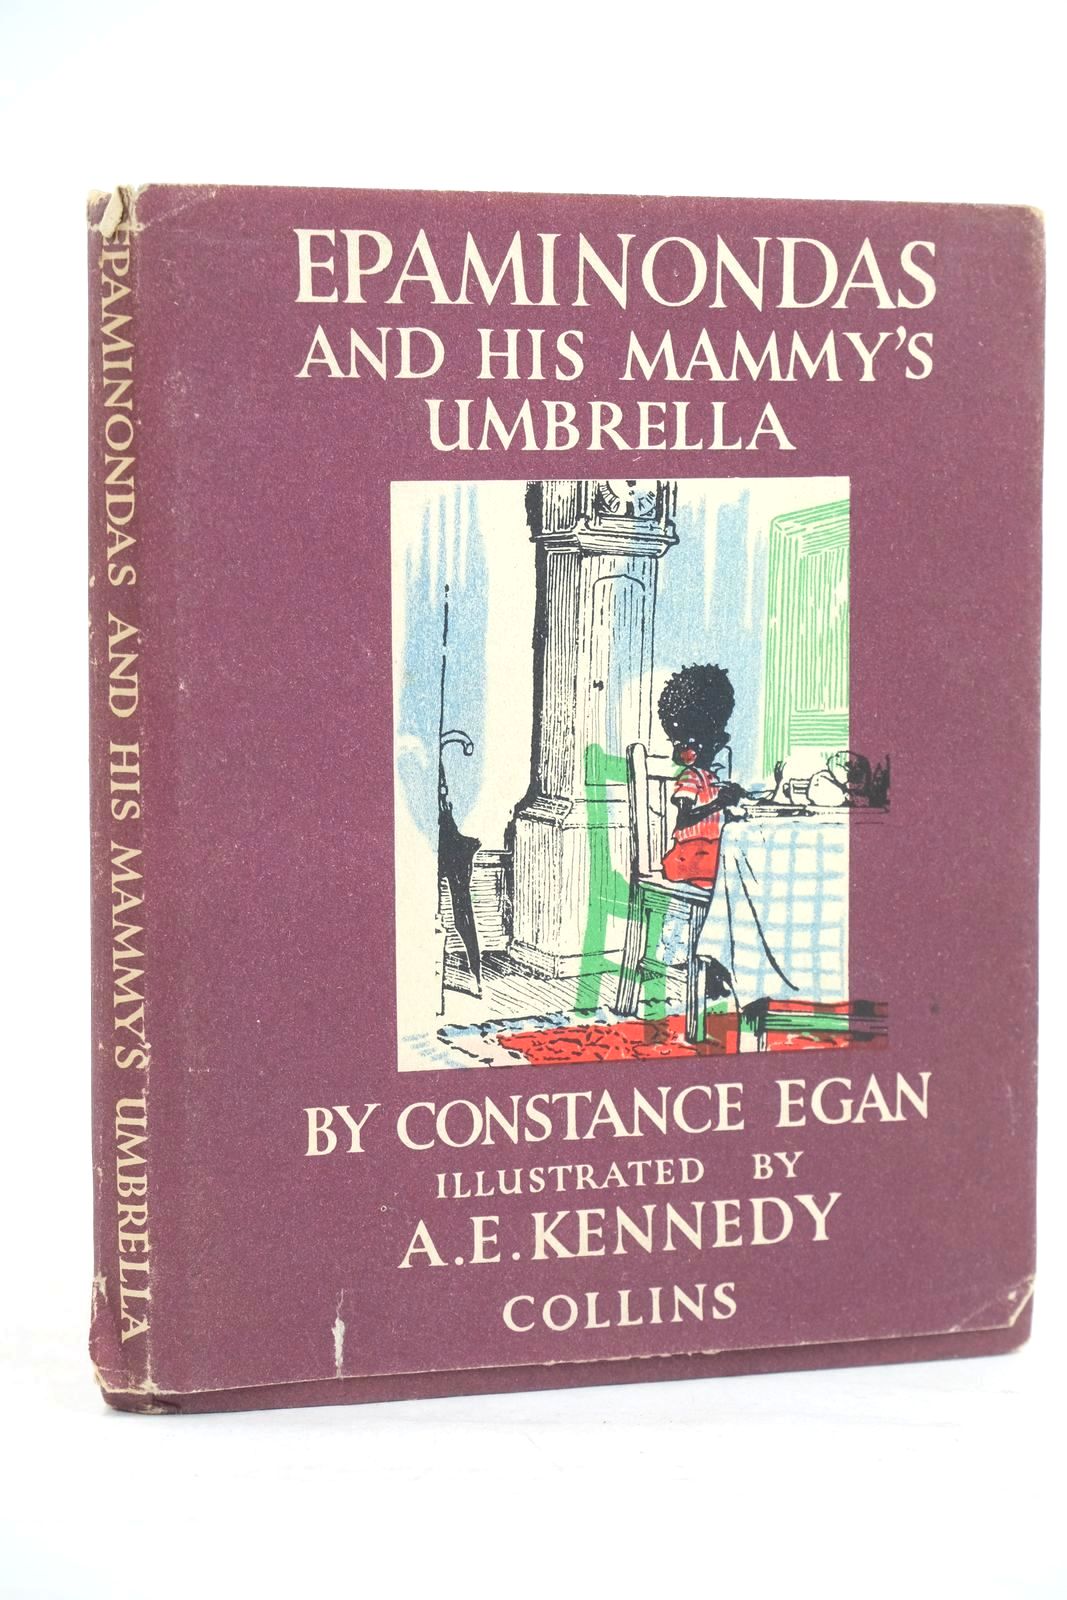 Photo of EPAMINONDAS AND HIS MAMMY'S UMBRELLA written by Egan, Constance illustrated by Kennedy, A.E. published by Collins (STOCK CODE: 1320095)  for sale by Stella & Rose's Books